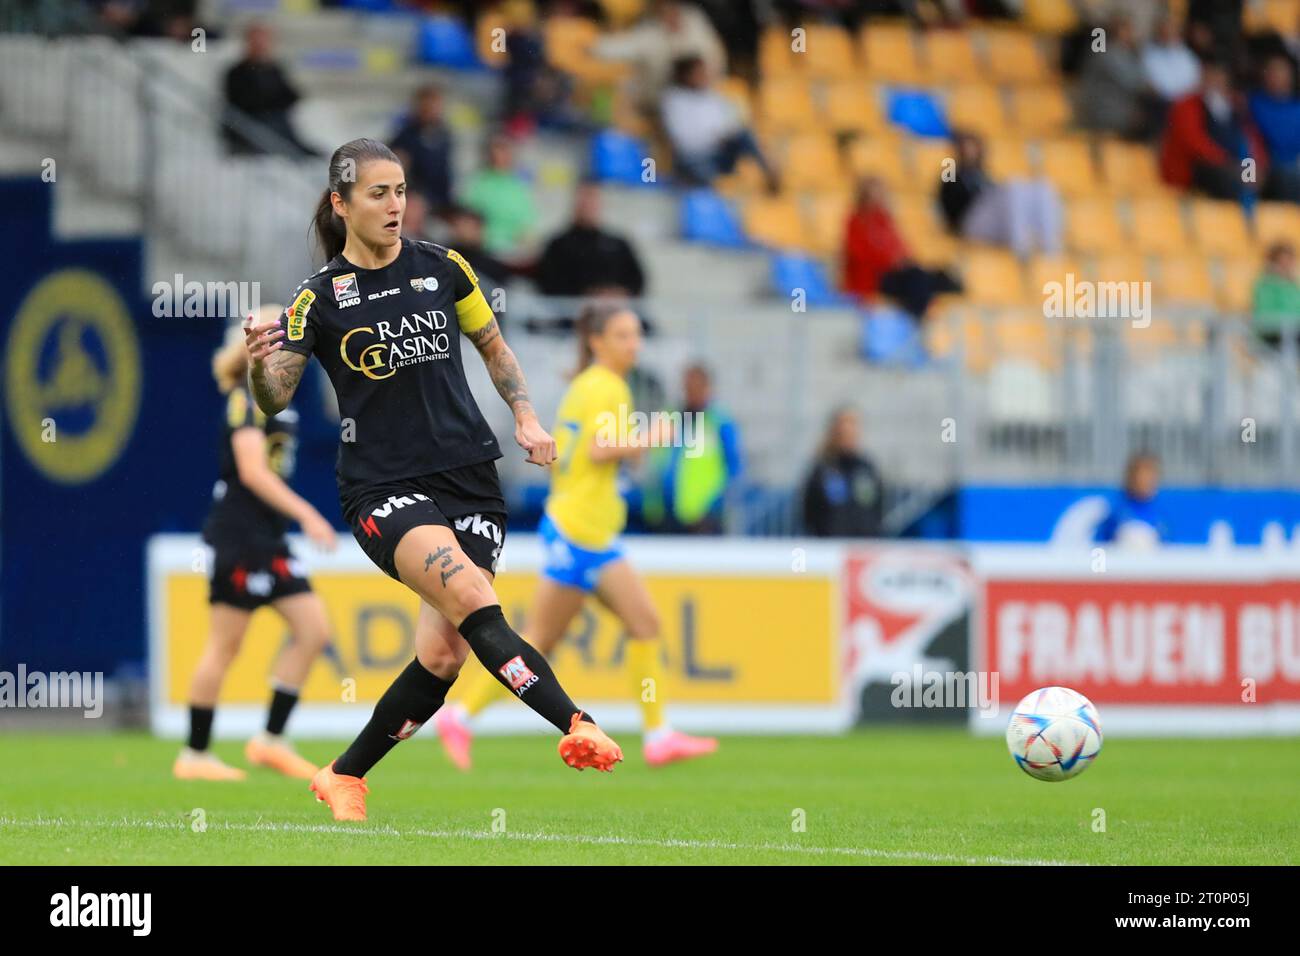 Francesca Calo (22 Altach) in action during the Admiral Frauen Bundesliga match First Vienna FC vs SCR Altach at Hohe Warte  (Tom Seiss/ SPP) Stock Photo